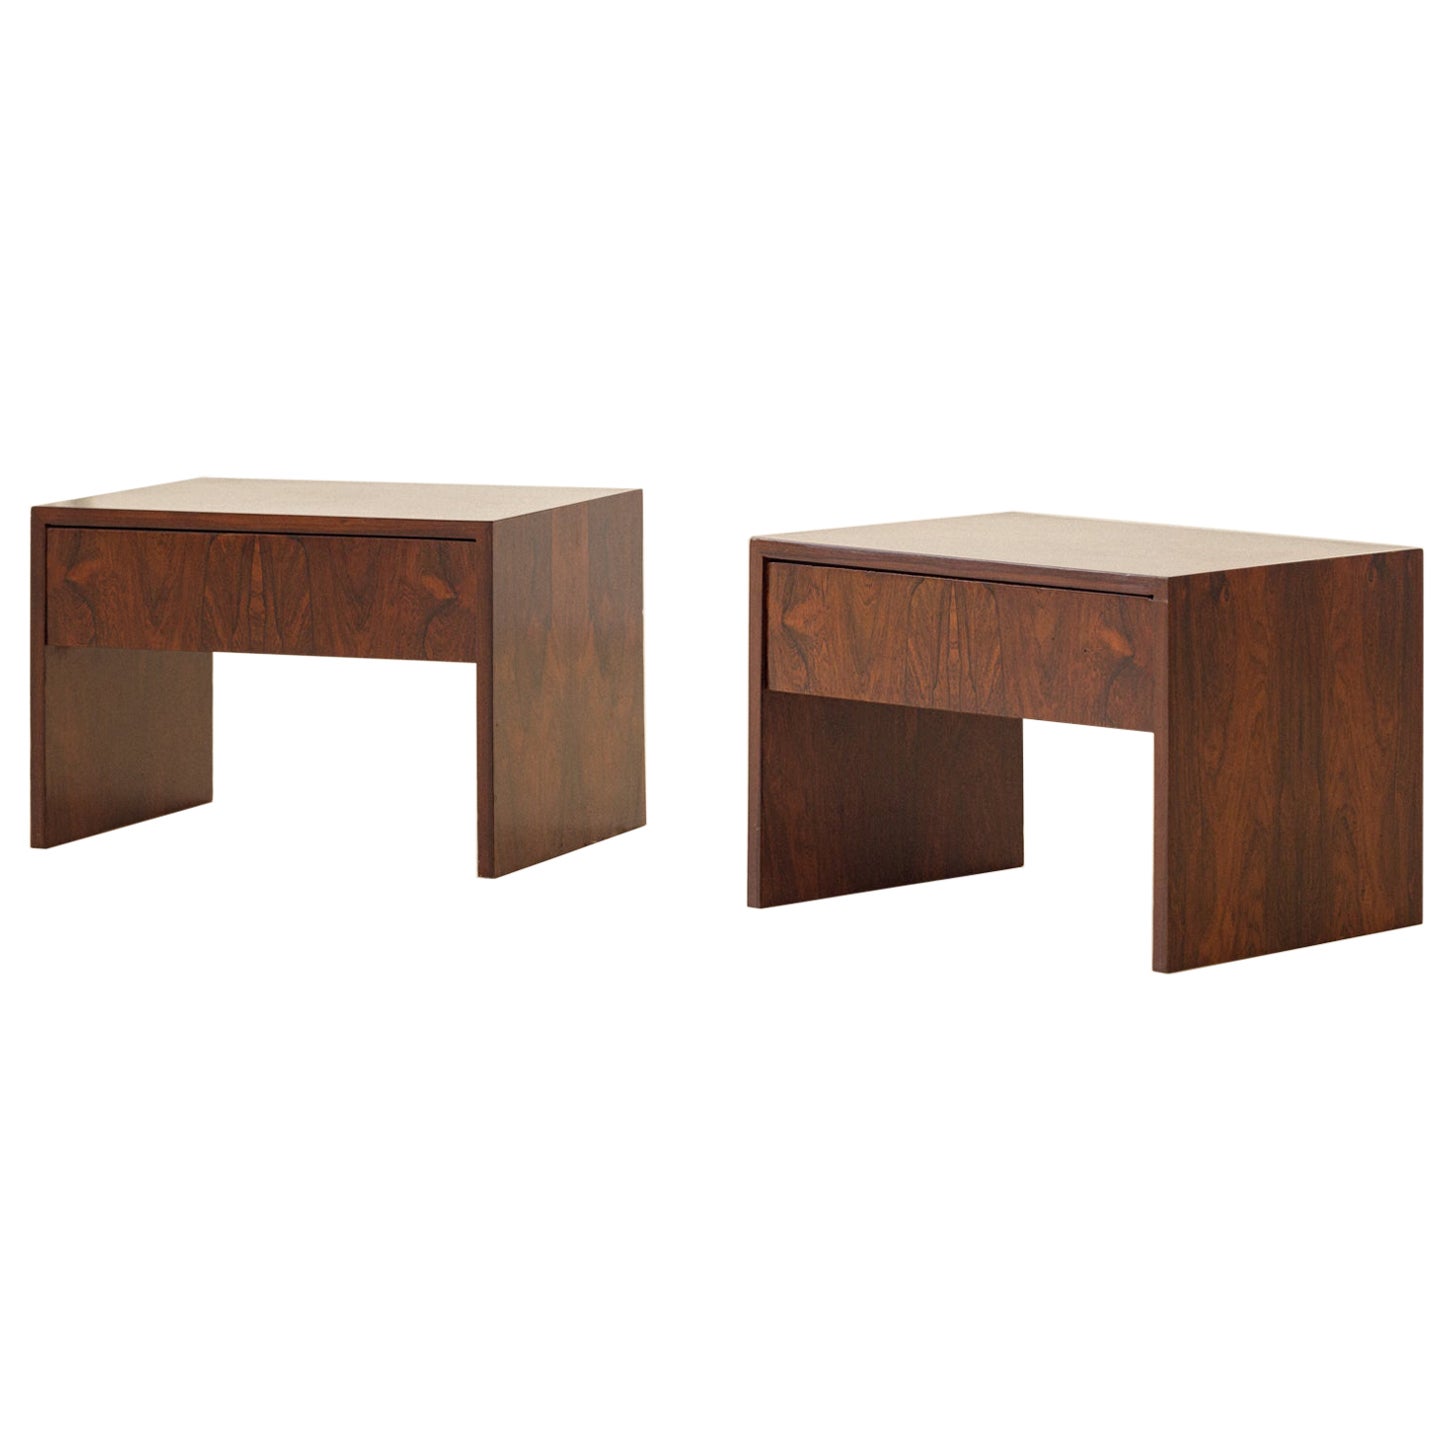 Pair of Rosewood Nightstands by Unknown Designer, 1960s, Brazilian Midcentury For Sale